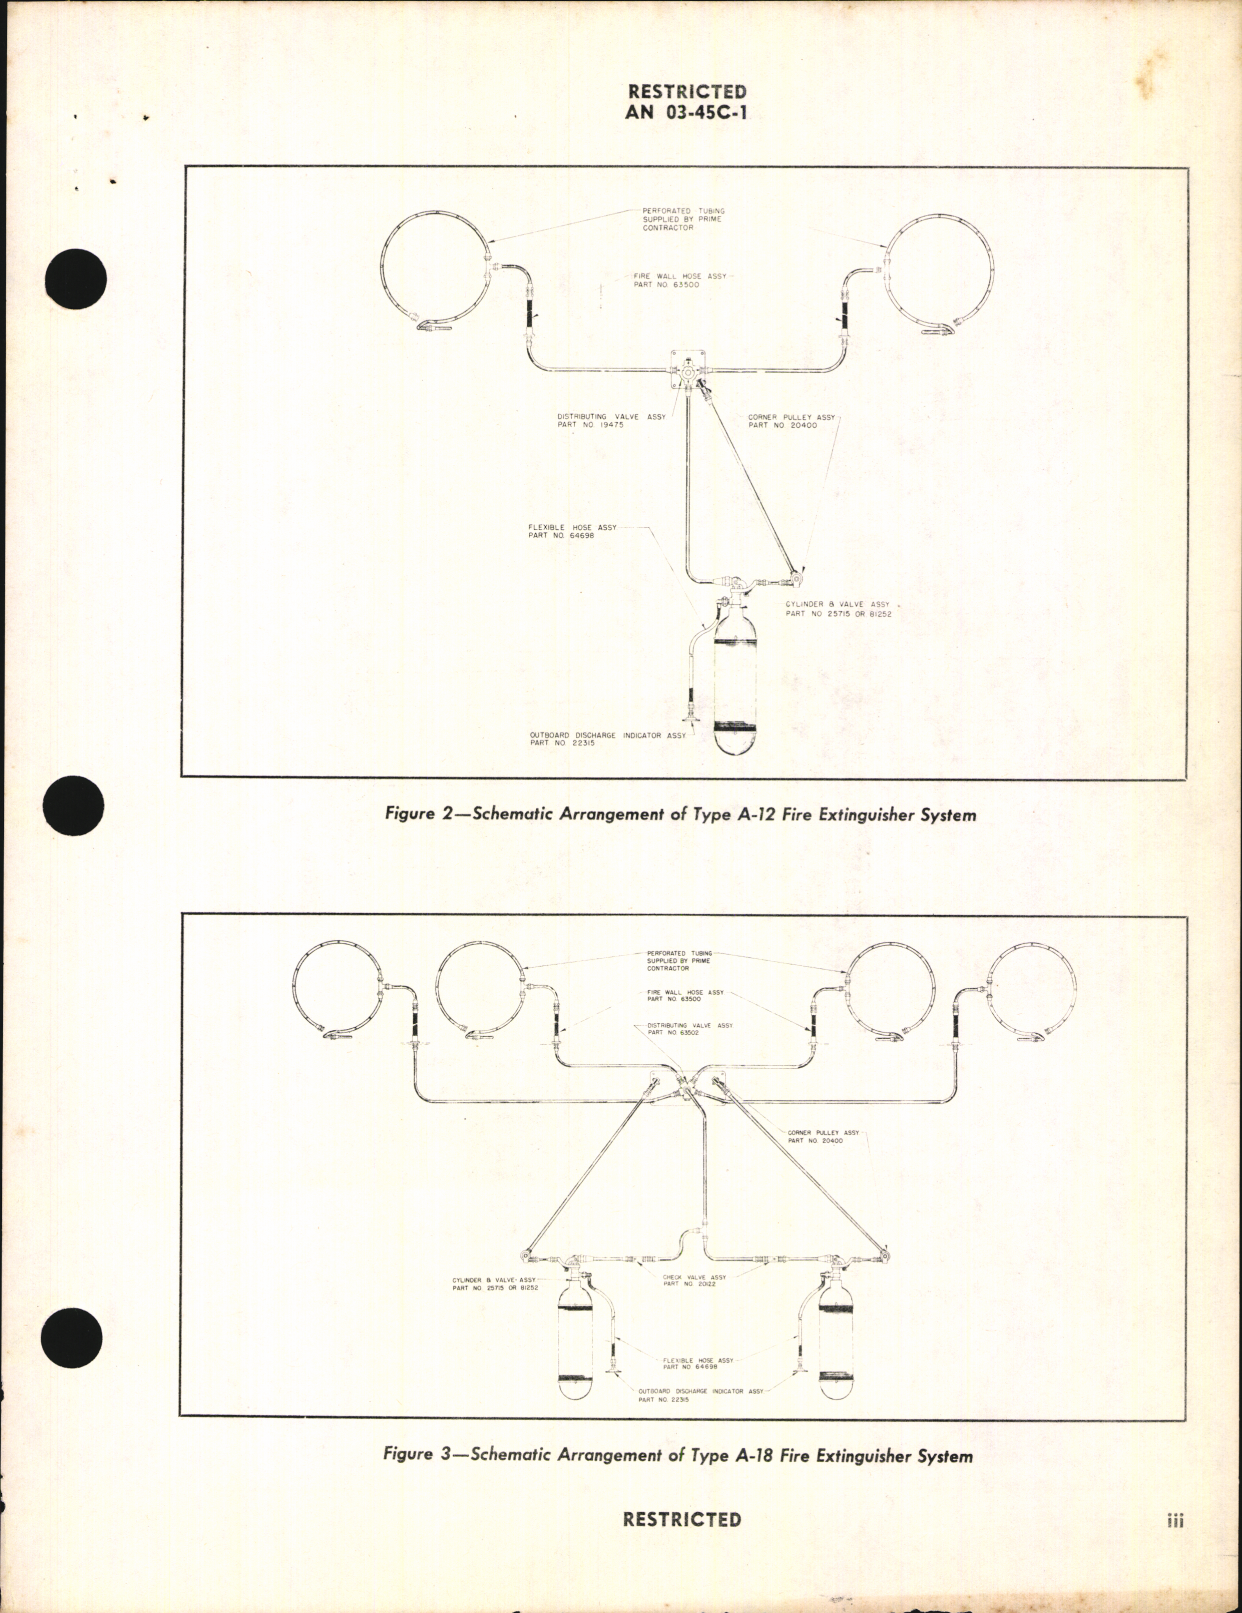 Sample page 5 from AirCorps Library document: Handbook of Instructions with Parts Catalog for Aircraft Fire Extinguisher Systems A-11, -12, and -18